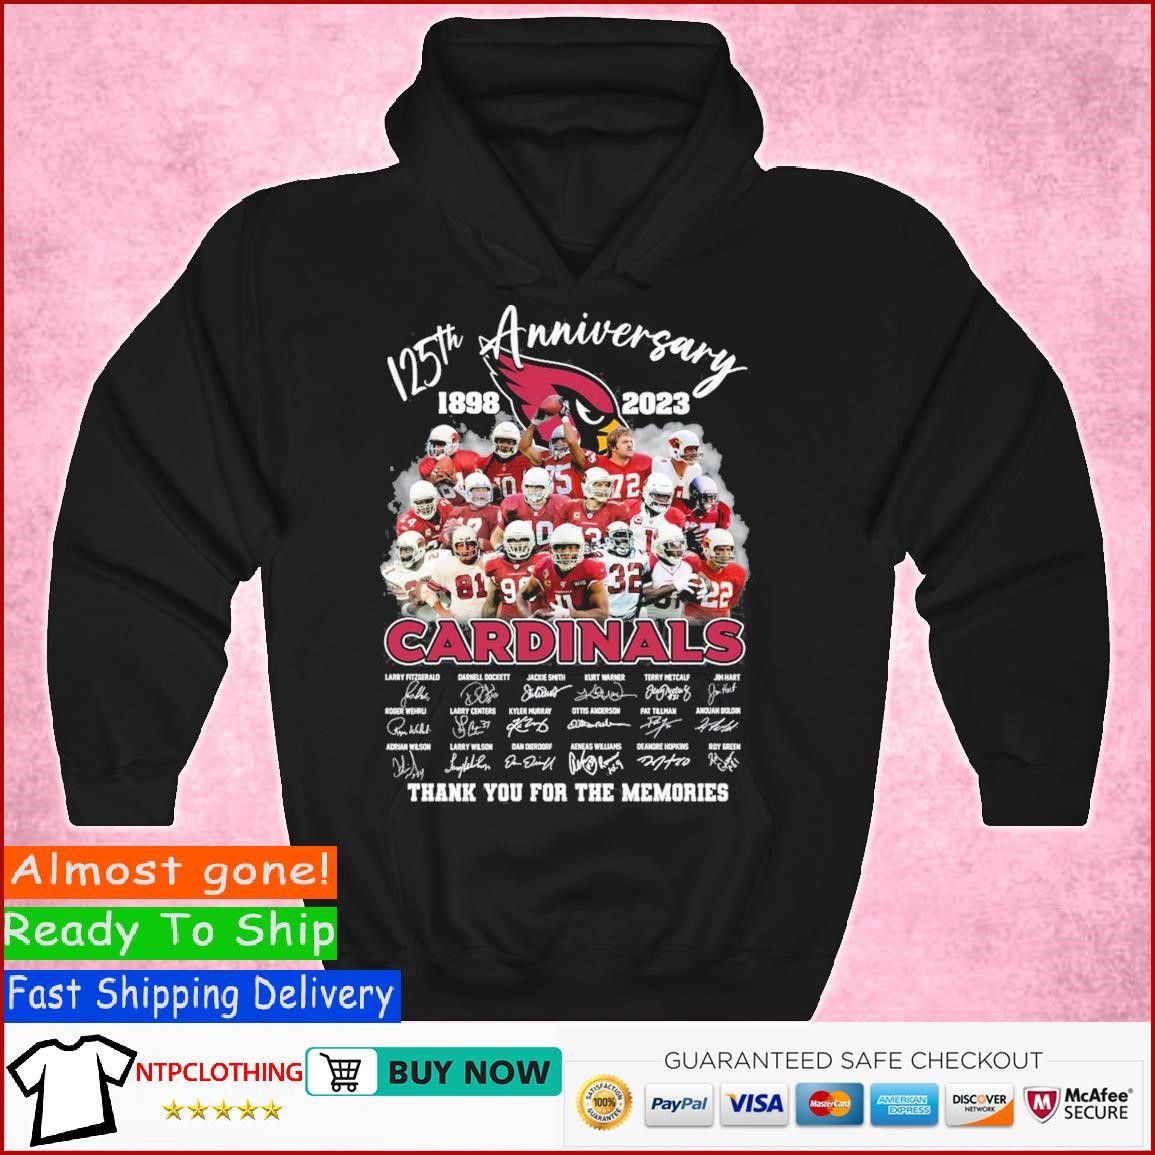 Official 125th Anniversary 1898 – 2023 Cardinals Thank You For The Memories  T-Shirt, hoodie, sweatshirt for men and women